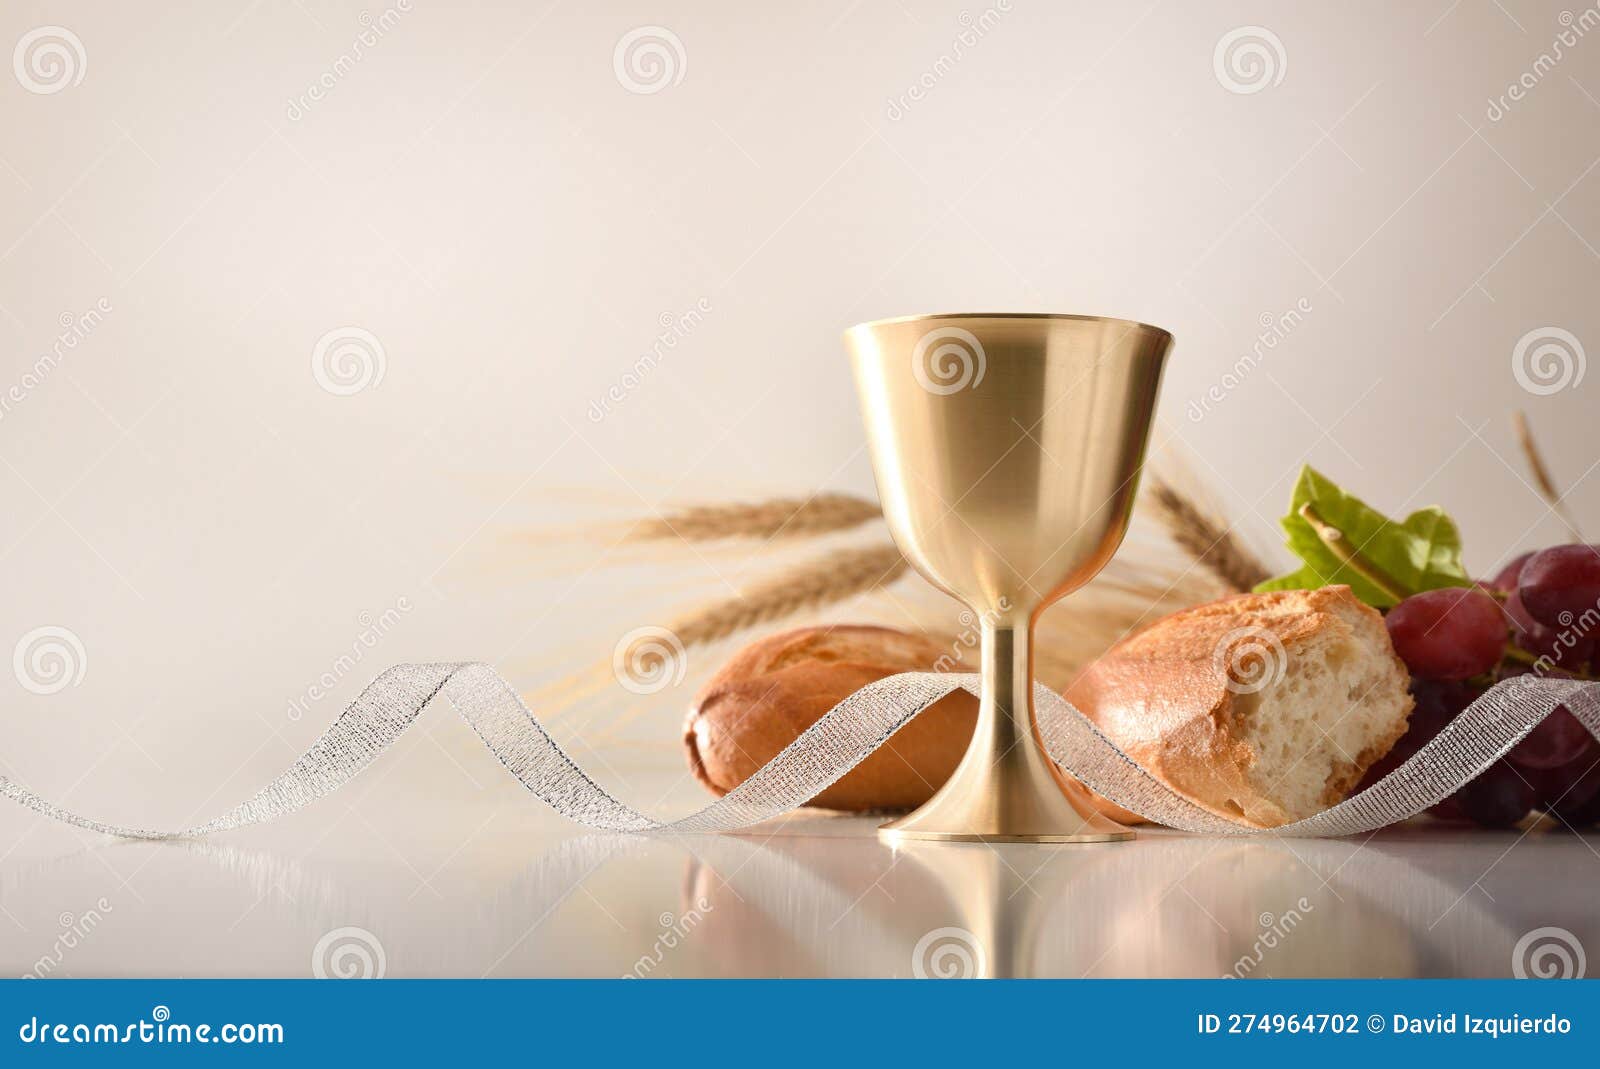 chalice on table with bread and grapes in the background